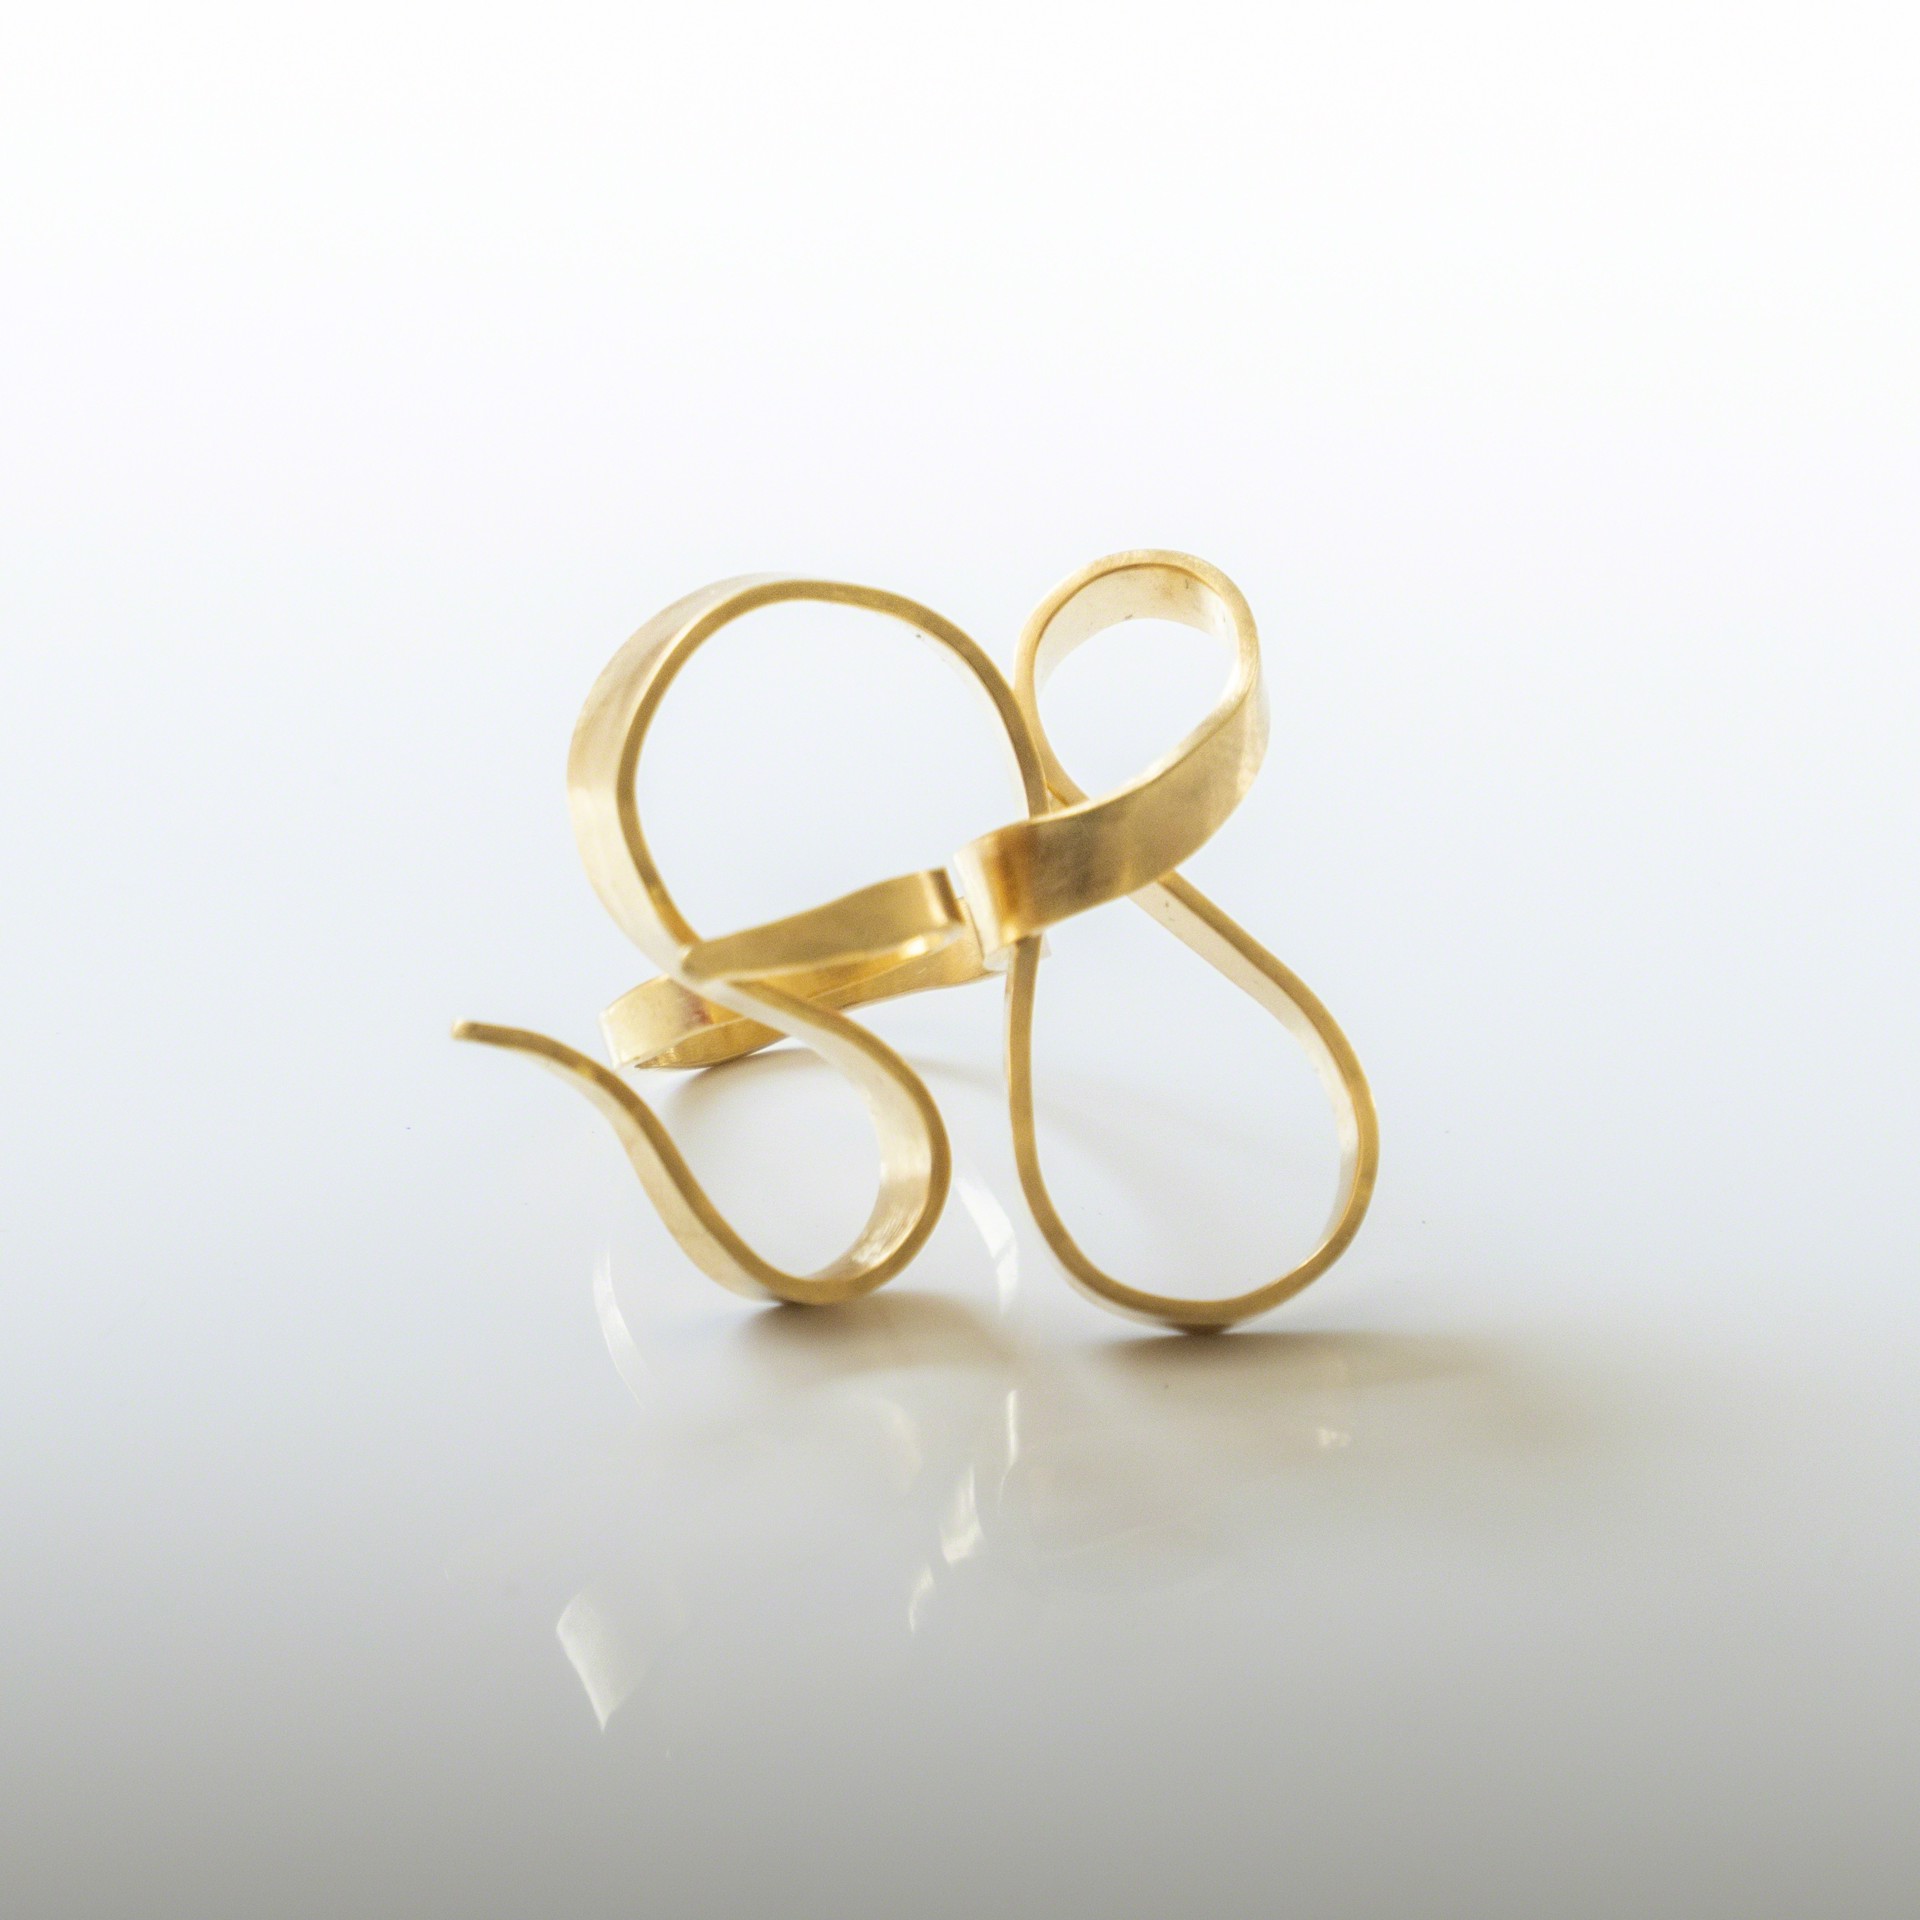 "Isadora" Ring by Jacques Jarrige